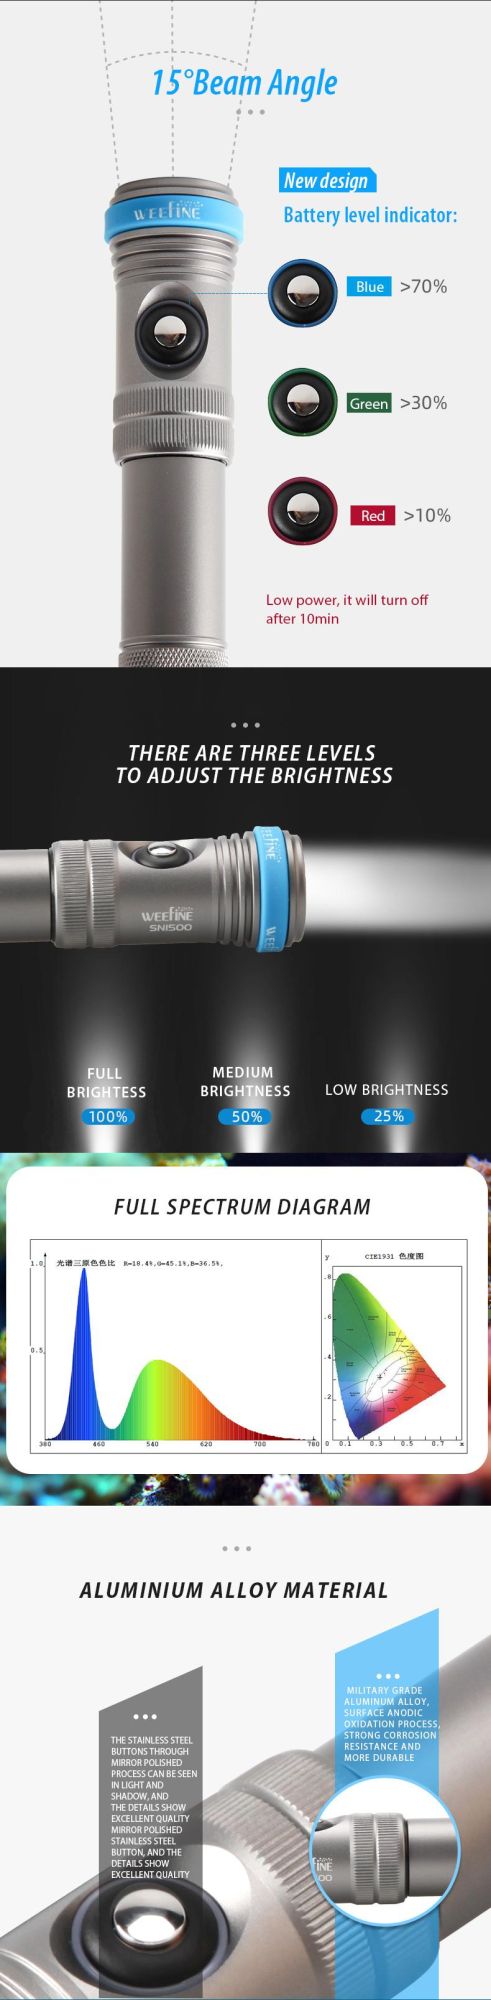 Underwater Depth up to 100m Dive Torch with High-Quality COB LED Style Array